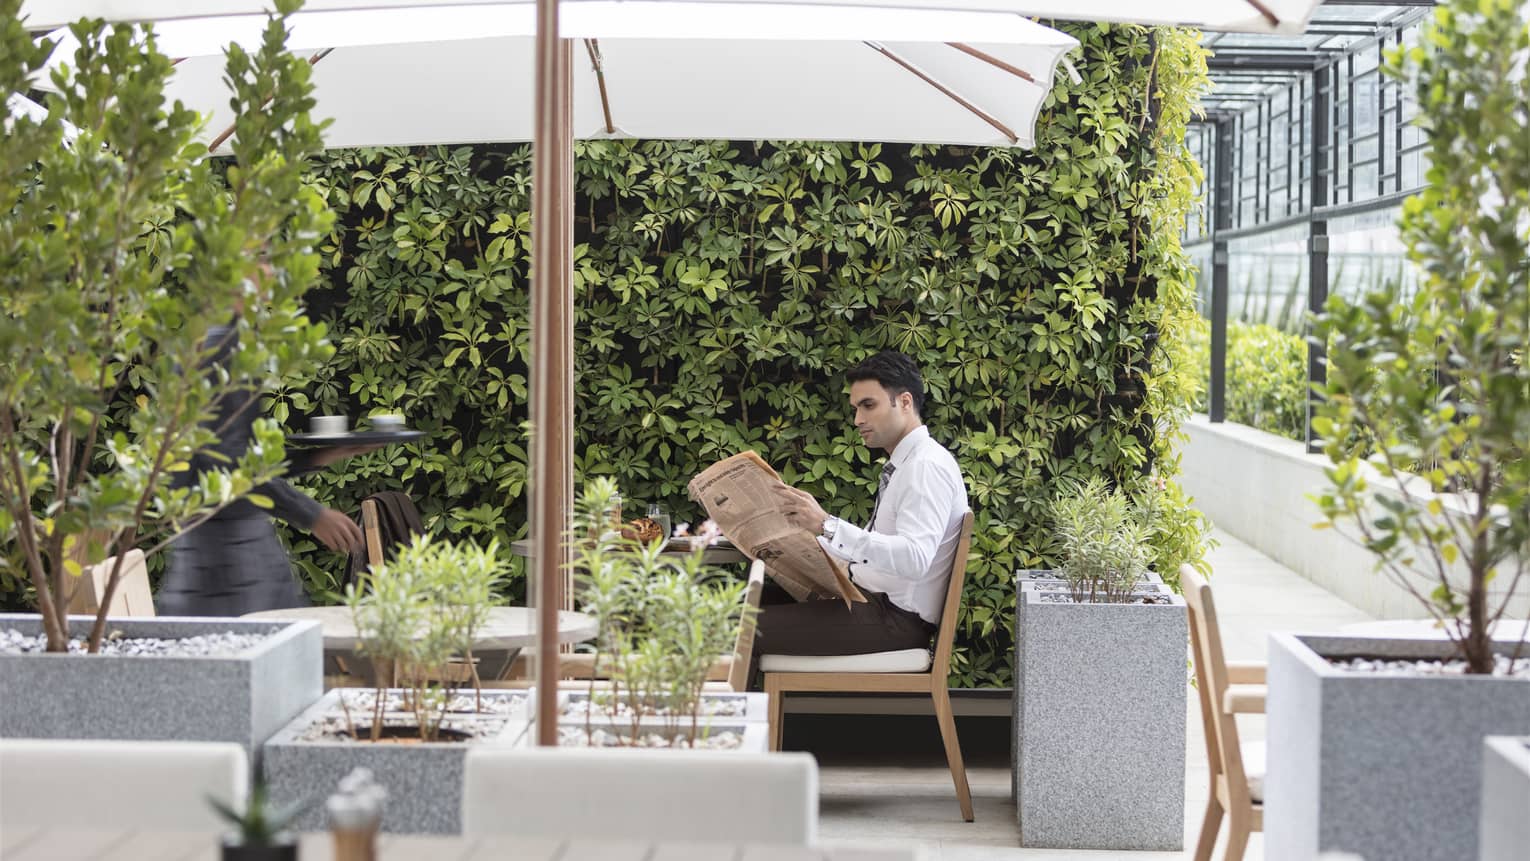 A guest reads a newspaper on an outdoor patio with foliage and umbrella covered tables.